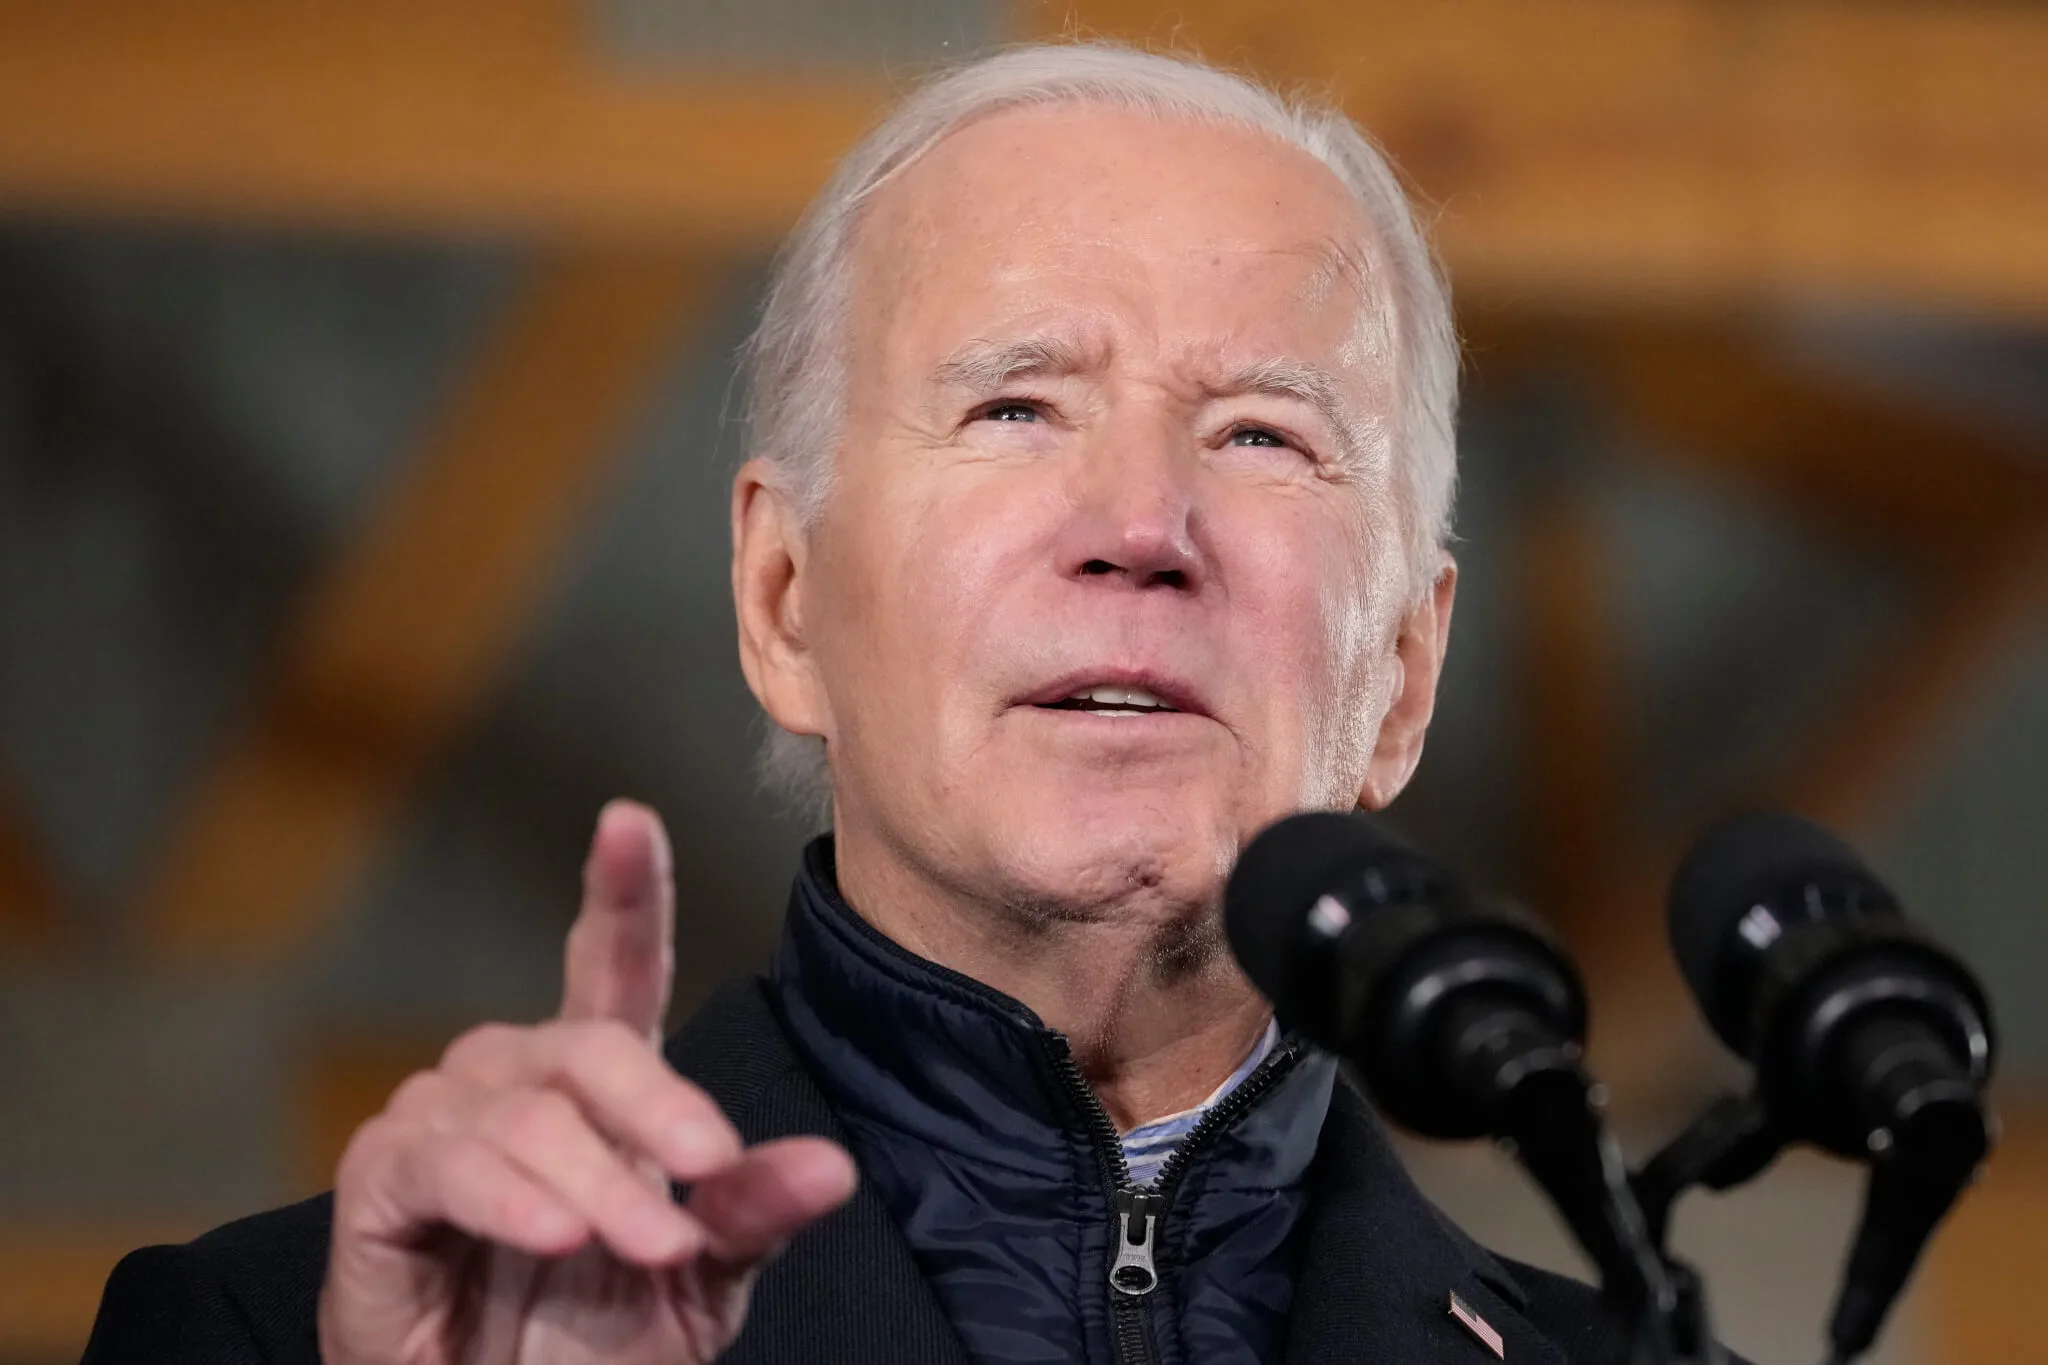 As Pennsylvania housing costs soar, Biden wants to turn empty offices into housing